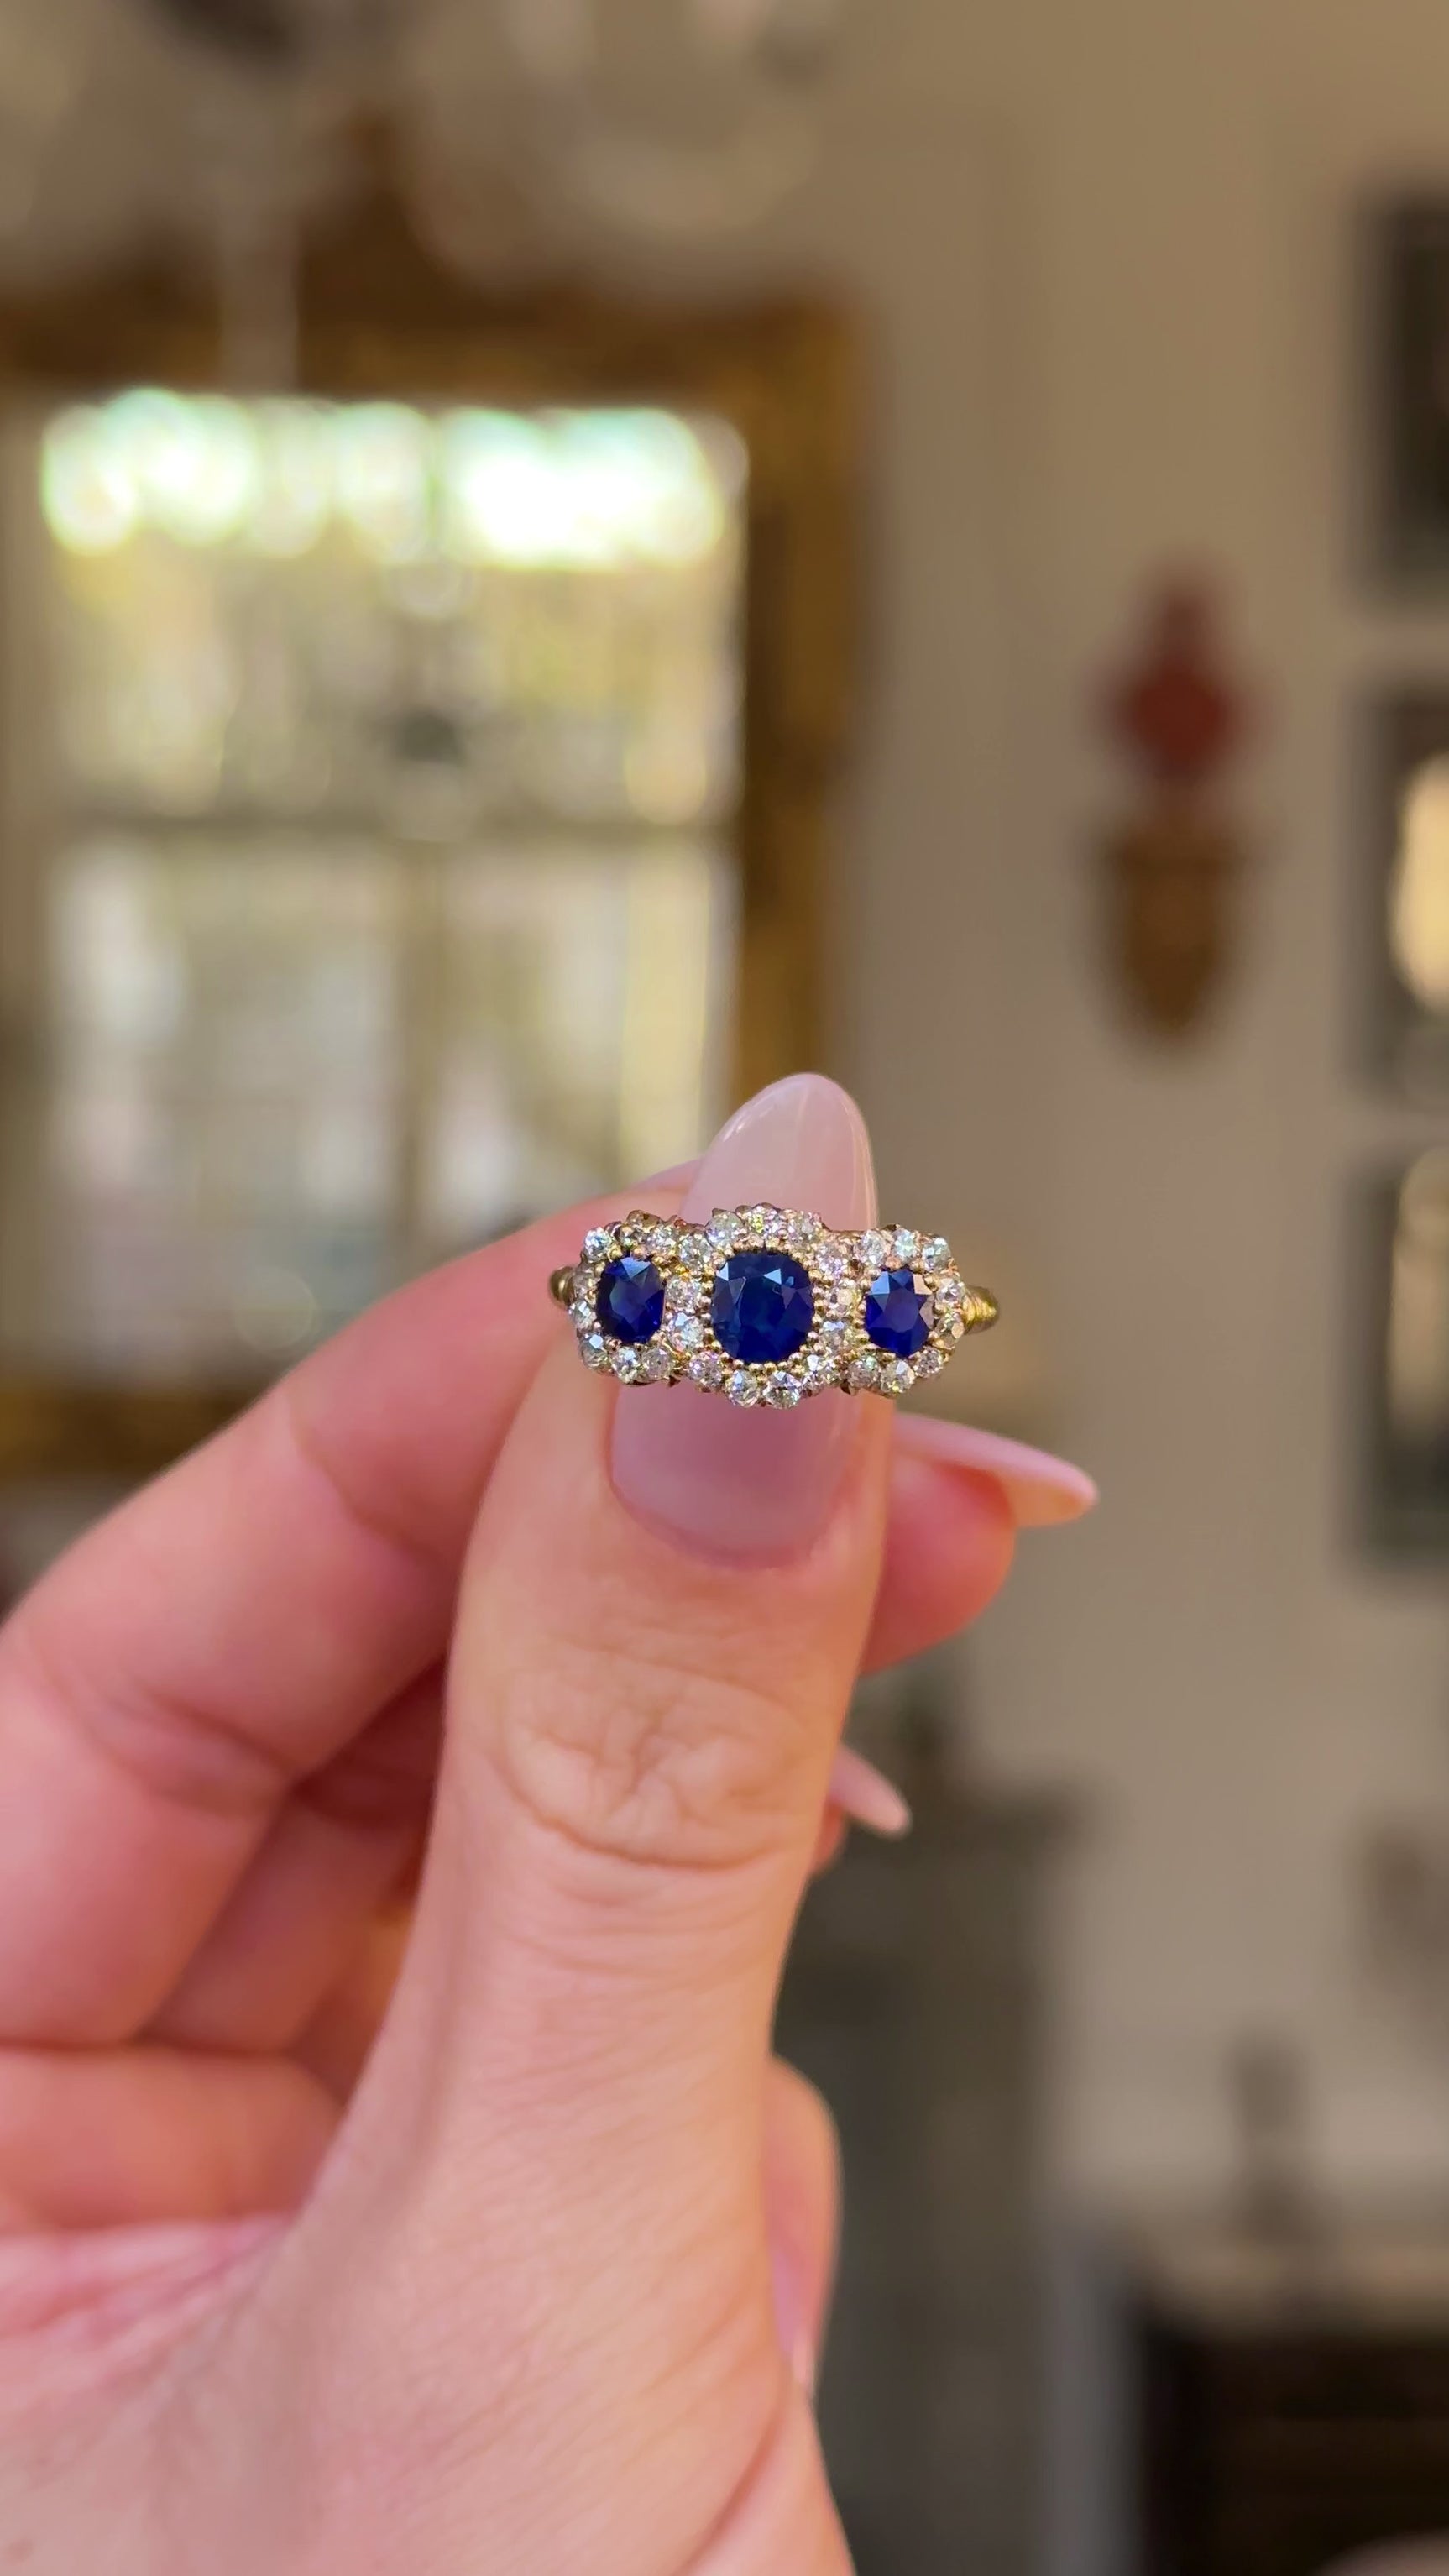 sapphire and diamond triple cluster ring held in fingers and moved around to give perspective.